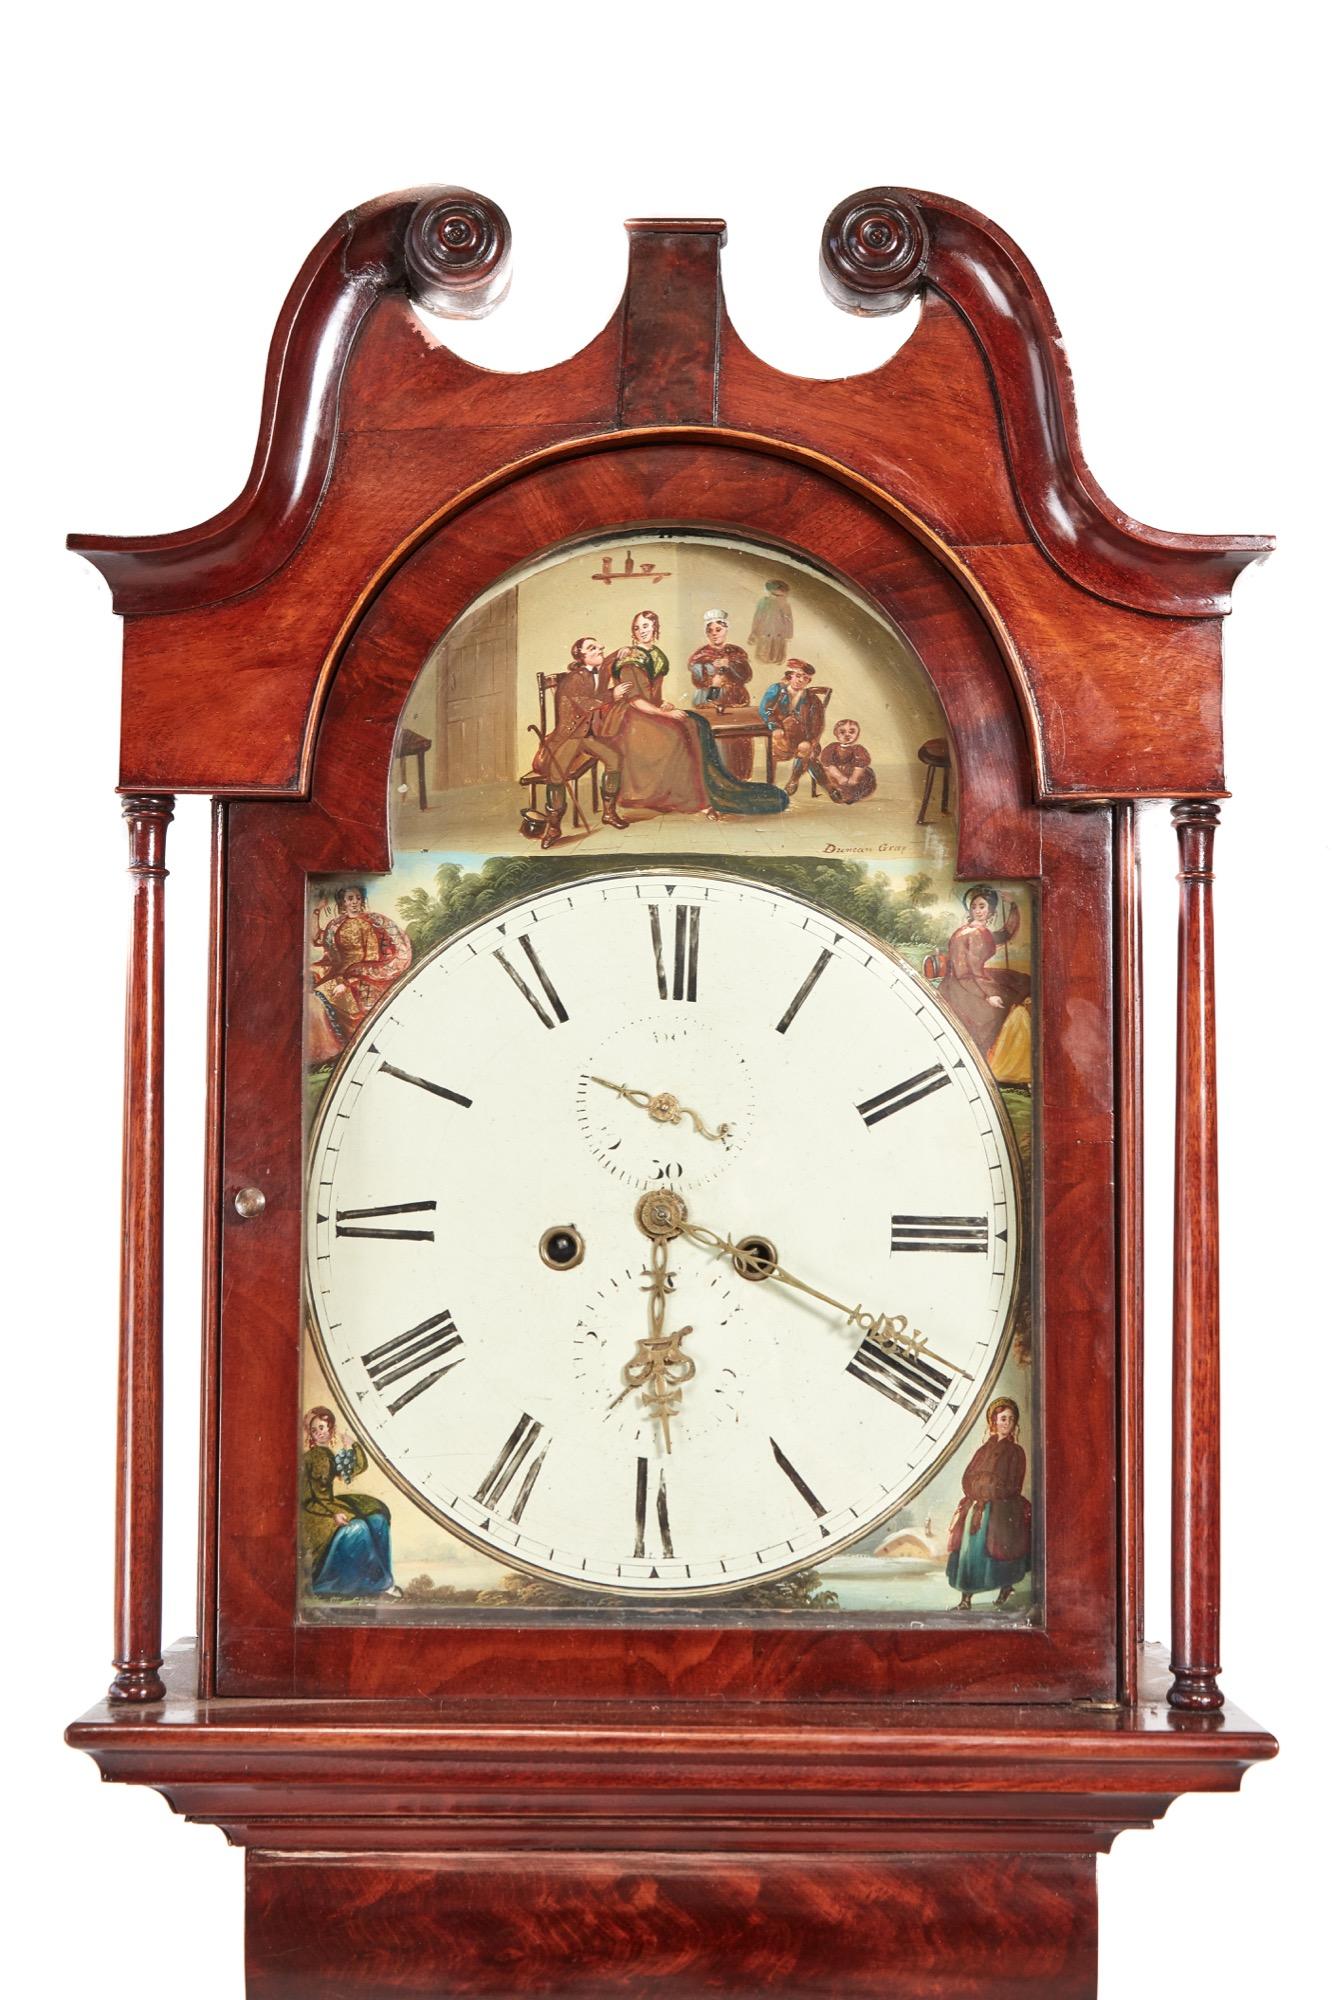 Antique mahogany eight day long case clock, the hood with a swan neck pediment, lovely decorative and colorful painted dial with date and seconds dial, eight day duration mechanism striking the hour on a bell, lovely flame mahogany case standing on